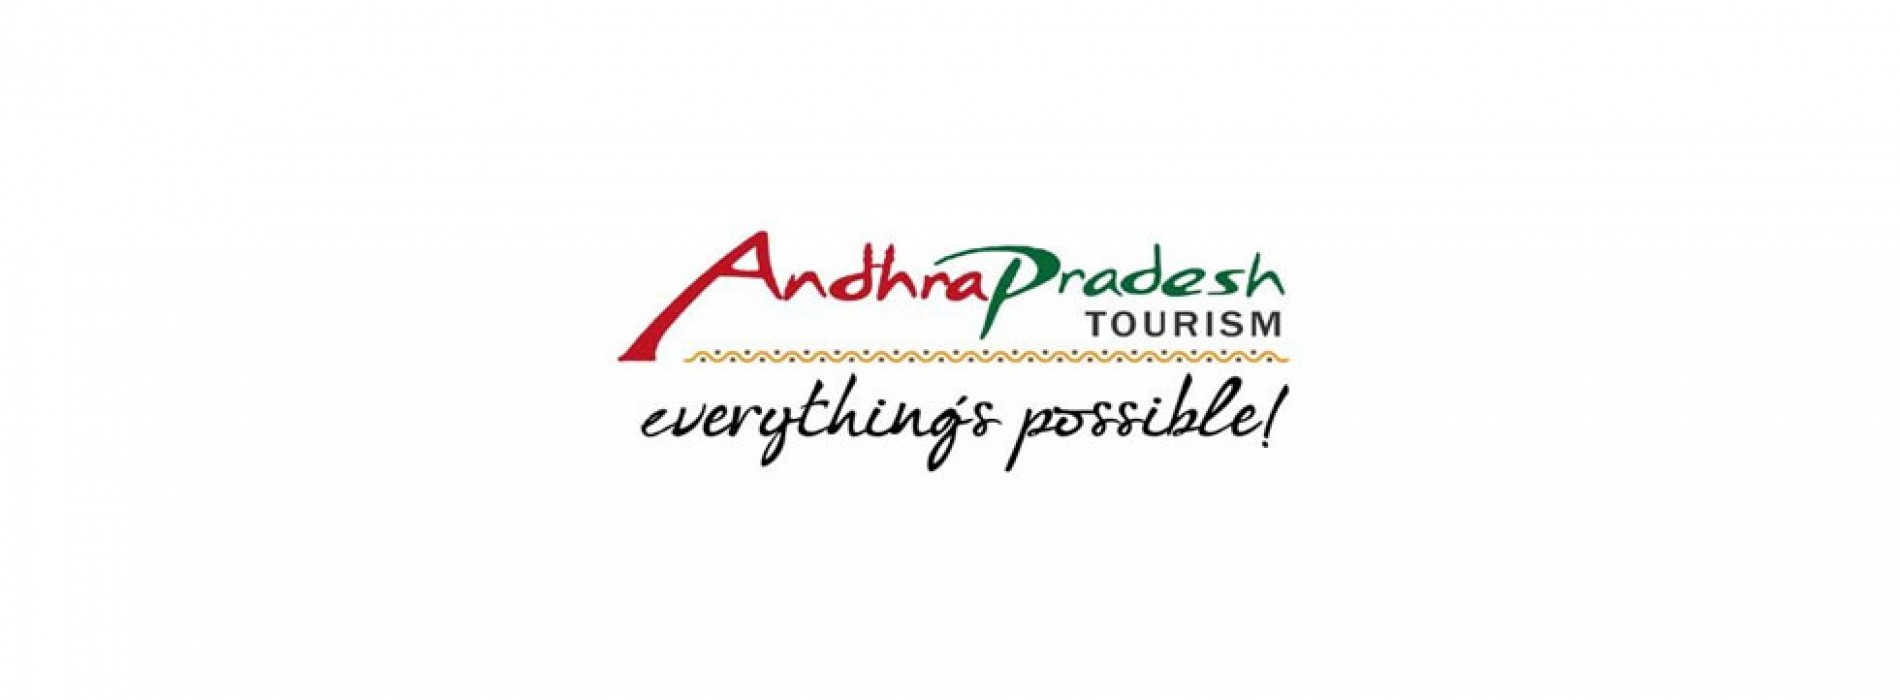 Andhra Pradesh allures tourists with water sports launch in Vijayawada